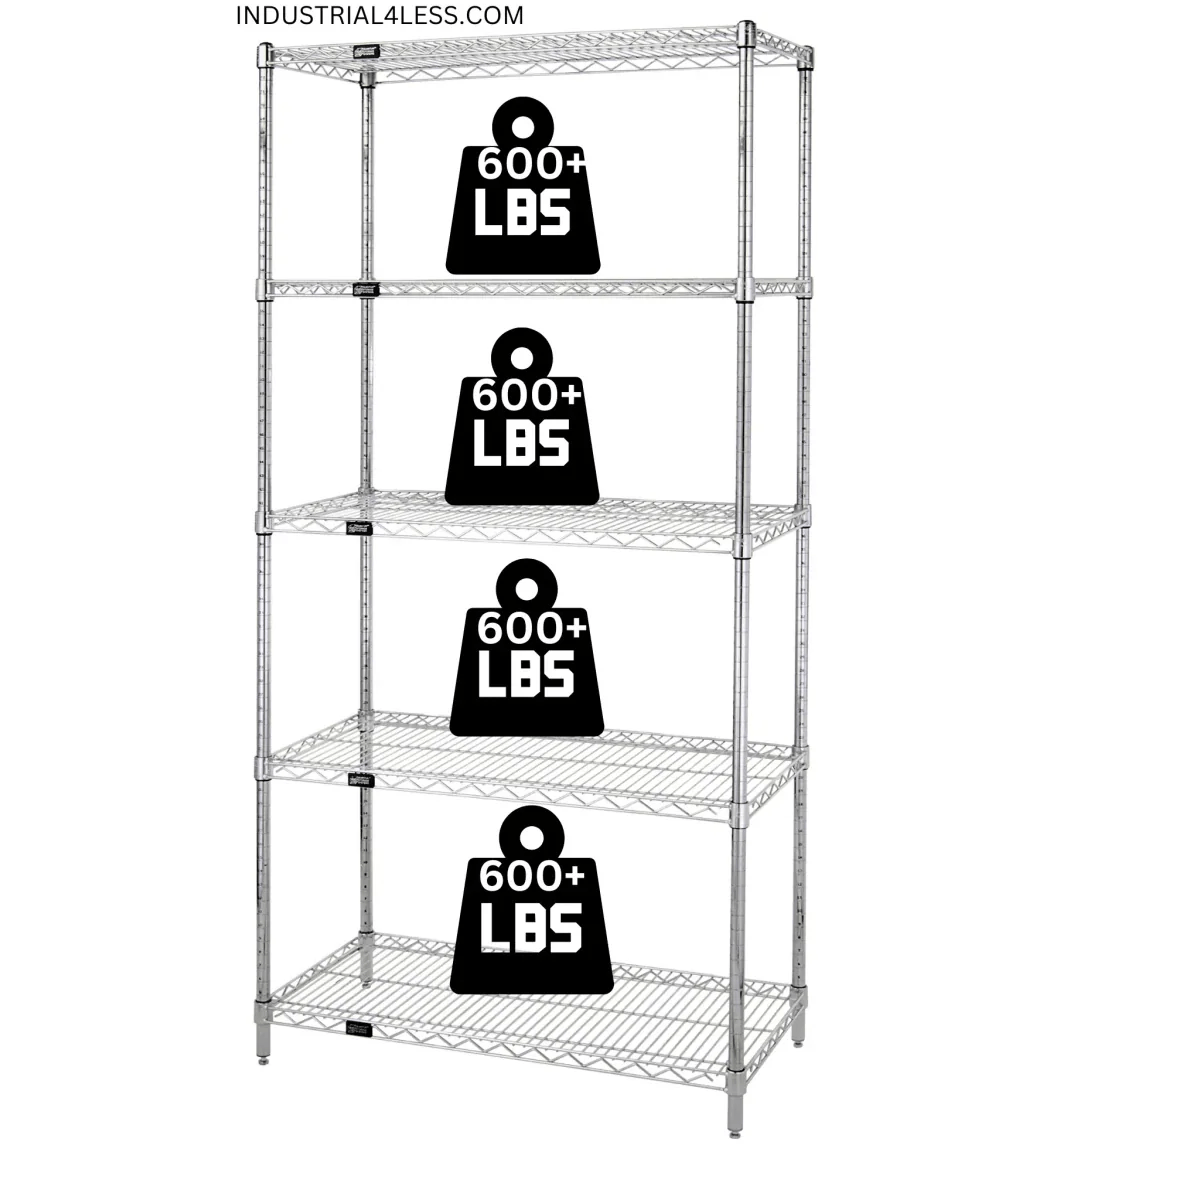 18" x 42" Stainless Steel Wire Shelving Unit - Industrial 4 Less - 18425S-5